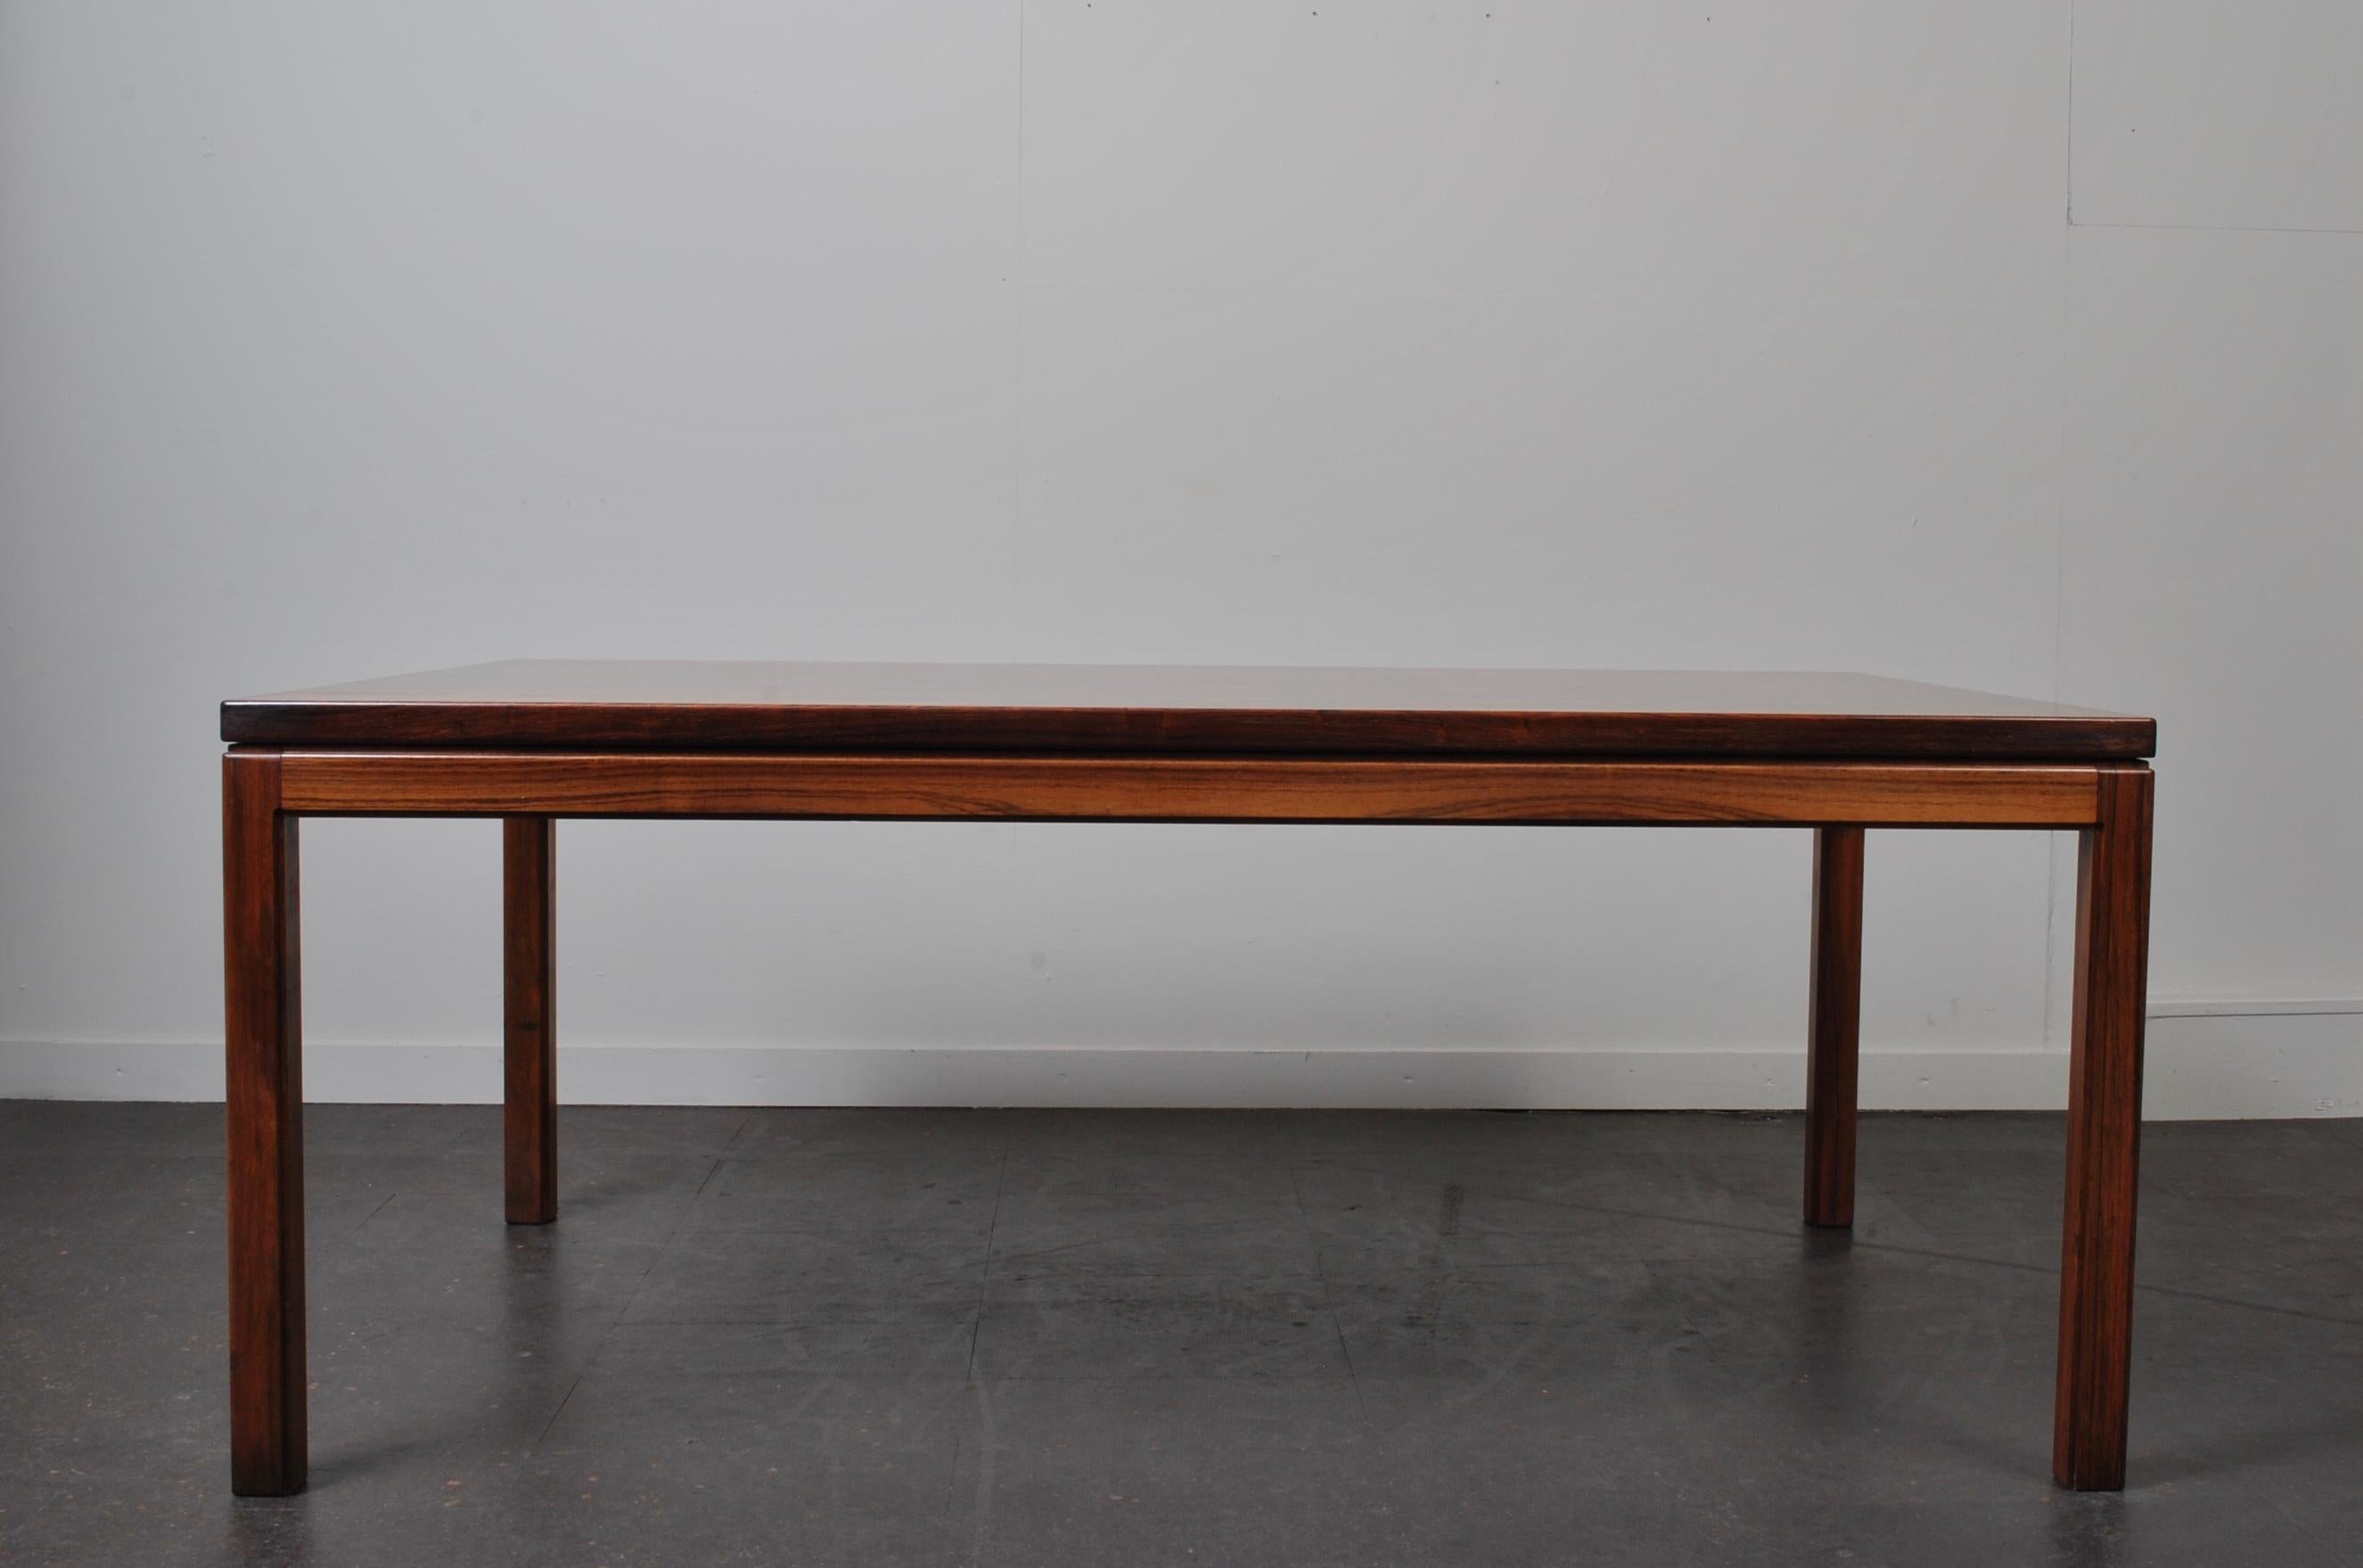 Spectacular rosewood on this large Danish midcentury rosewood coffee table. Produced in Denmark, circa 1960. Simplicity of modernist design and construction with the most amazing surface of rosewood.